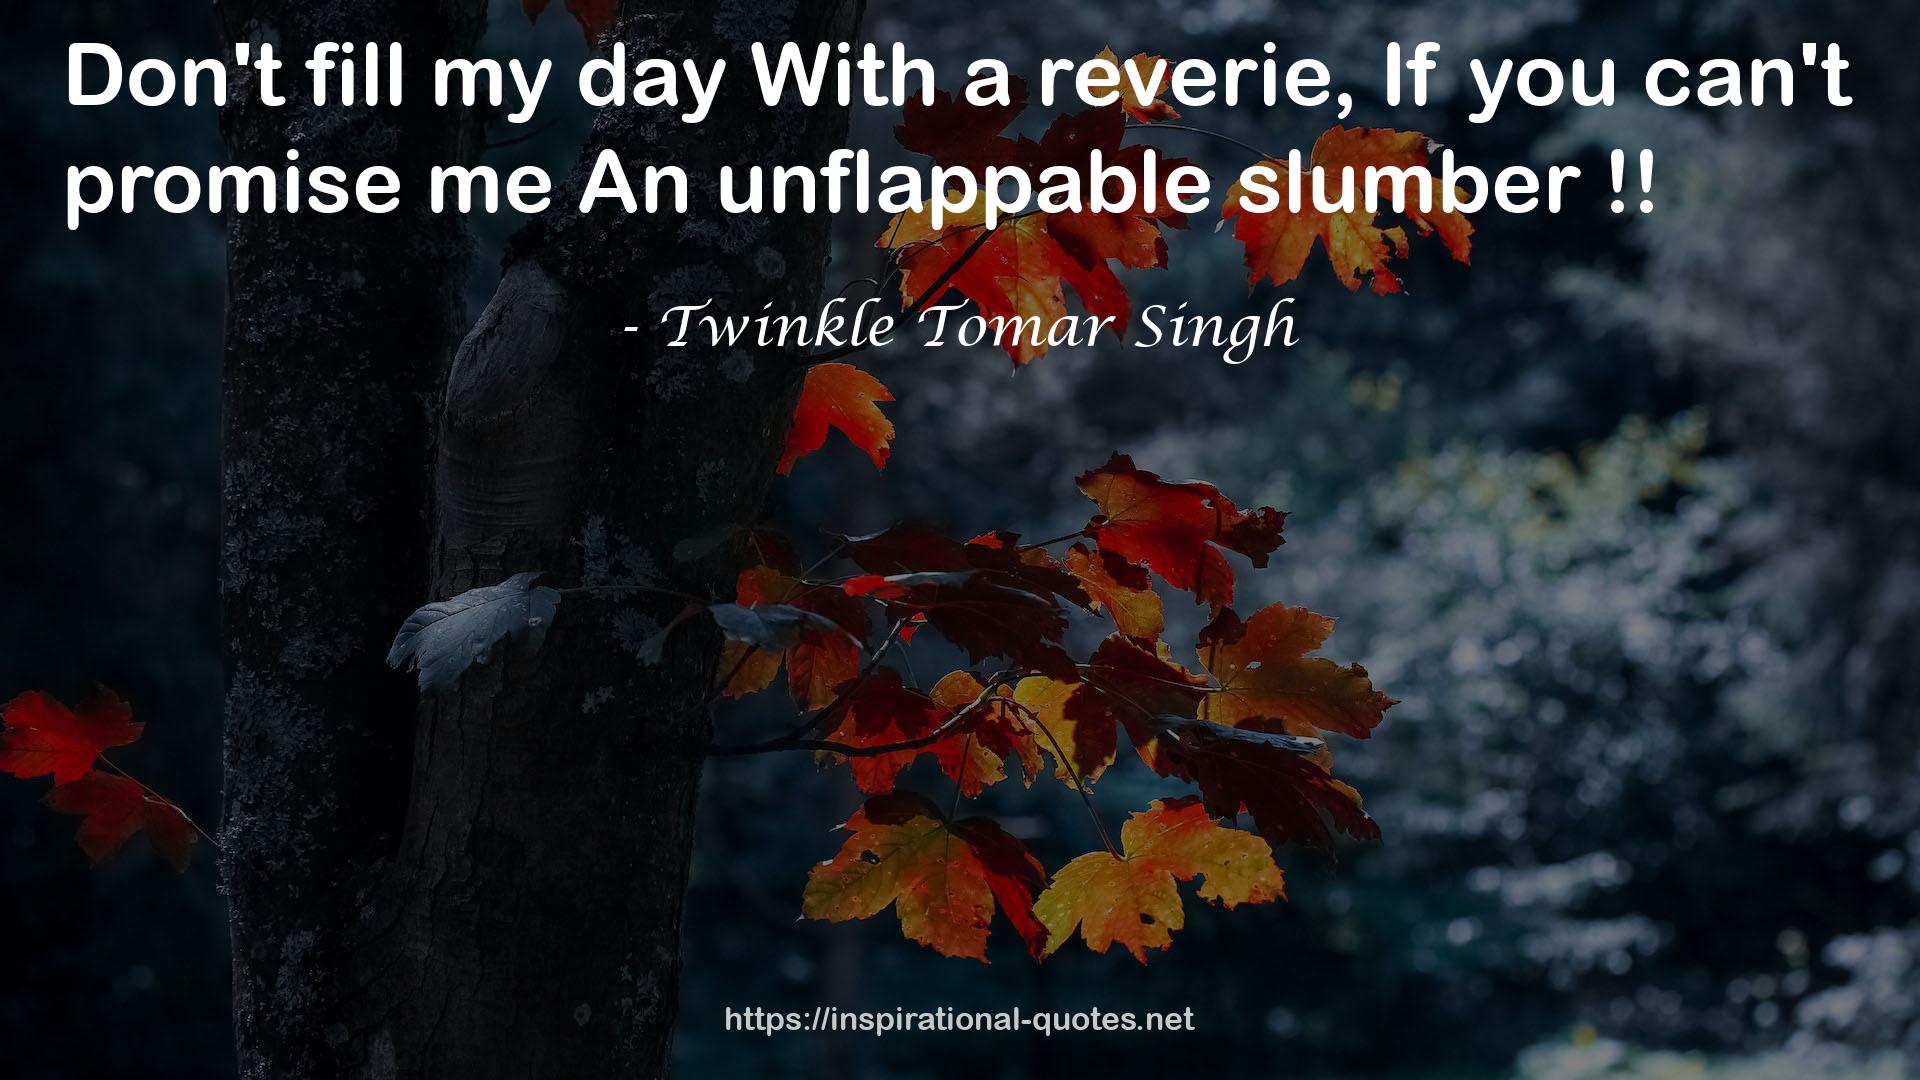 Twinkle Tomar Singh QUOTES